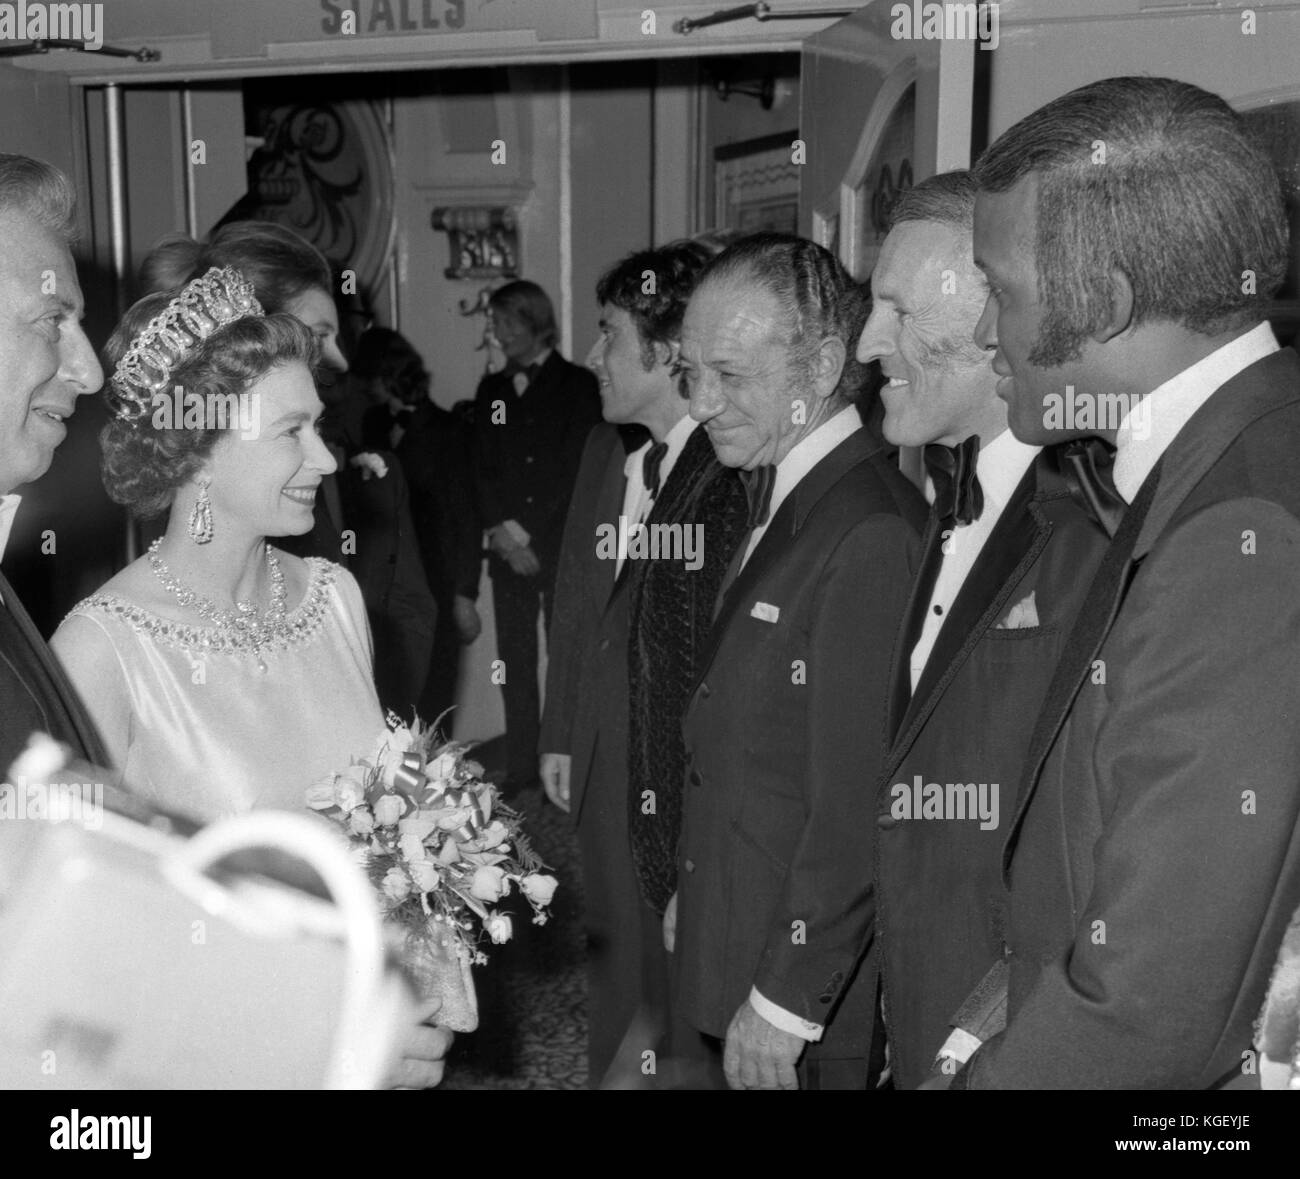 Queen Elizabeth II meeting British entertainer Bruce Forsyth at the Royal Variety Performance, London Palladium. Next to Forsyth are comedian Sid James, left, and singer Lovelace Watkins. Stock Photo